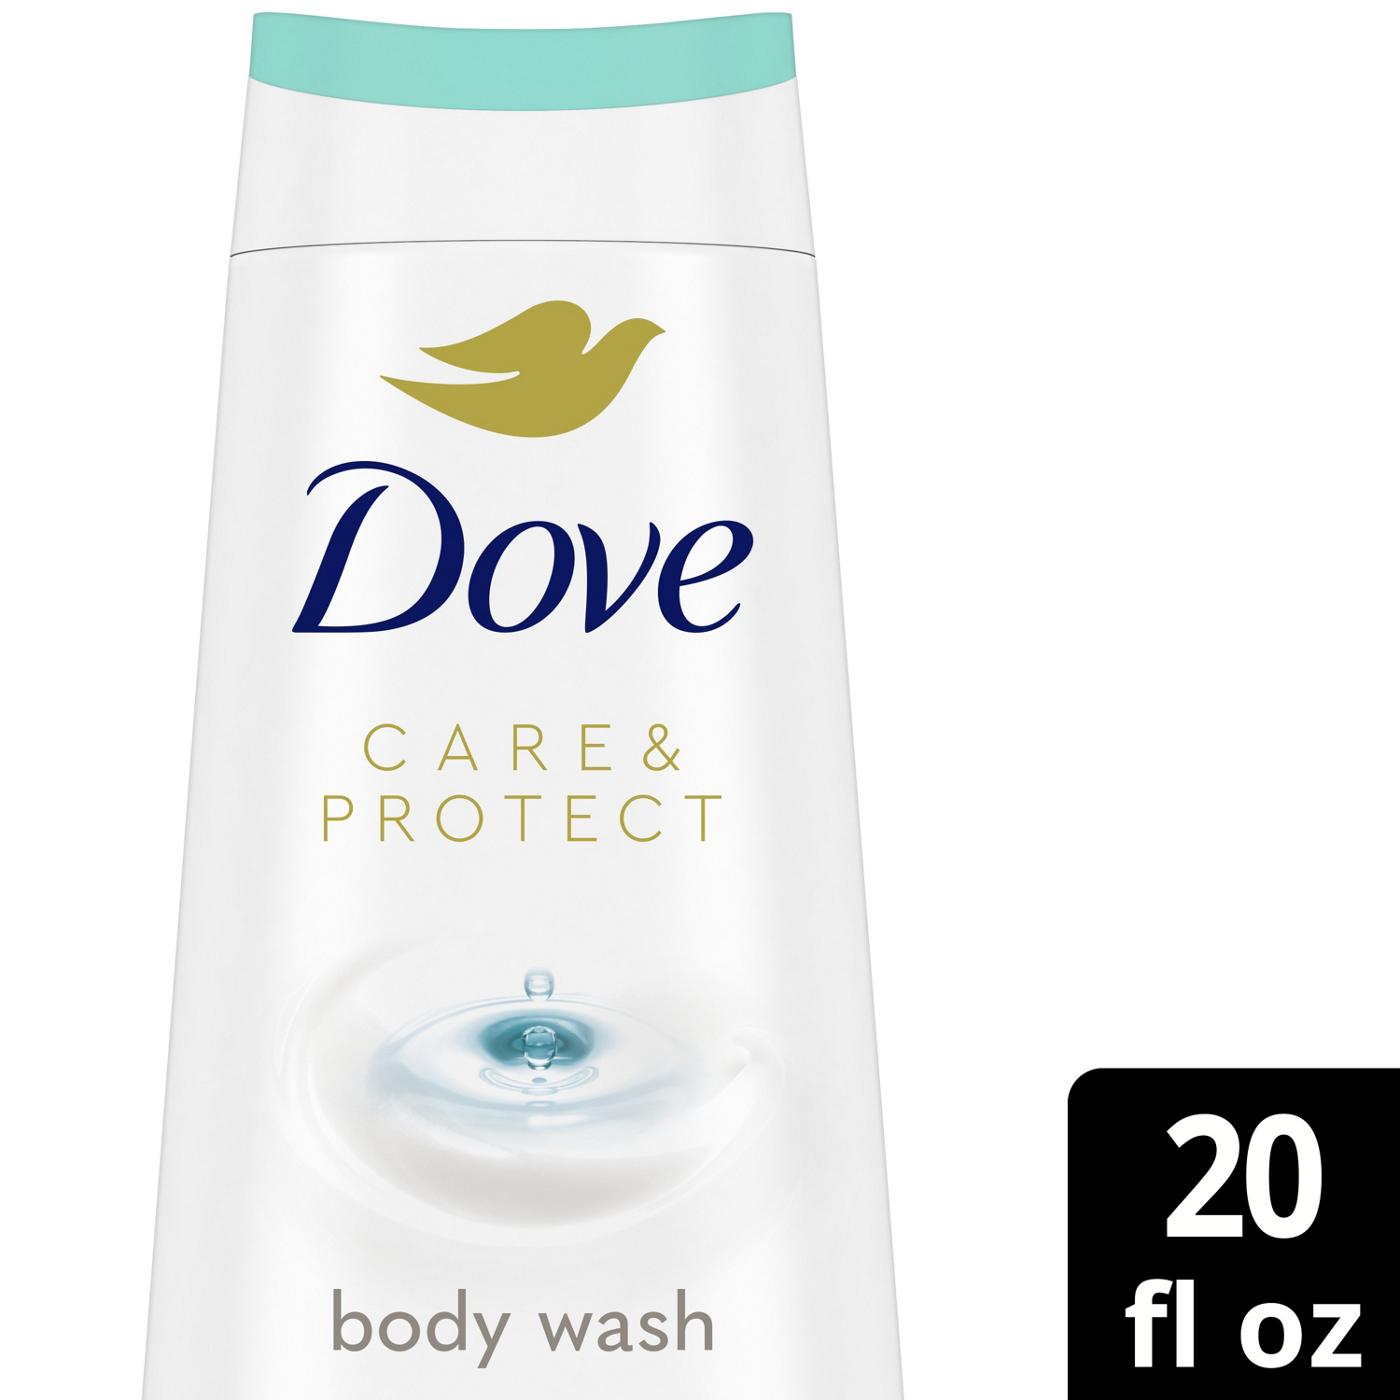 Dove Care & Protect Antibacterial Body Wash; image 7 of 8